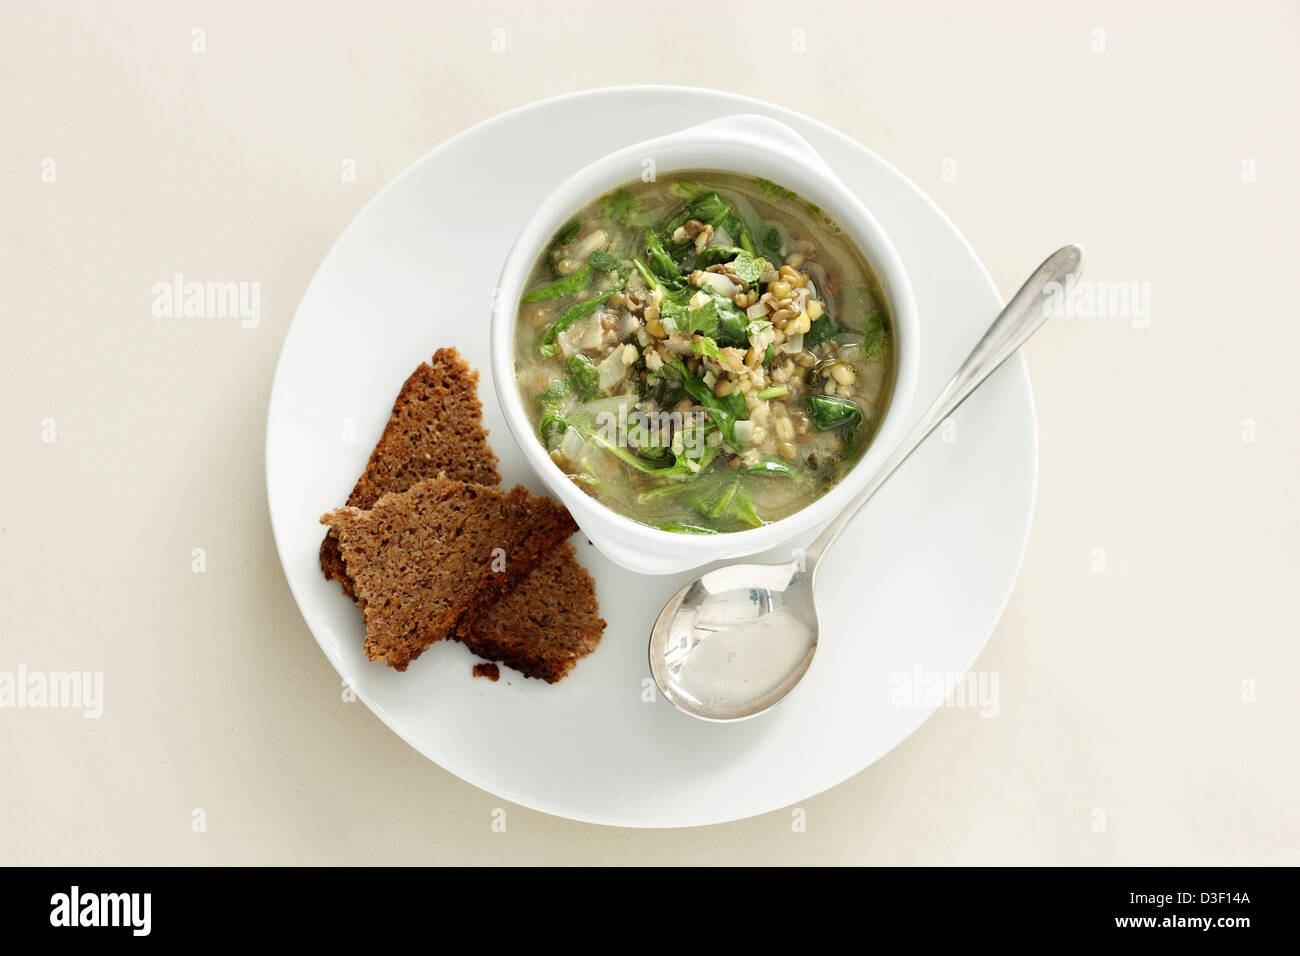 Mung bean spinach soup brown bread Stock Photo